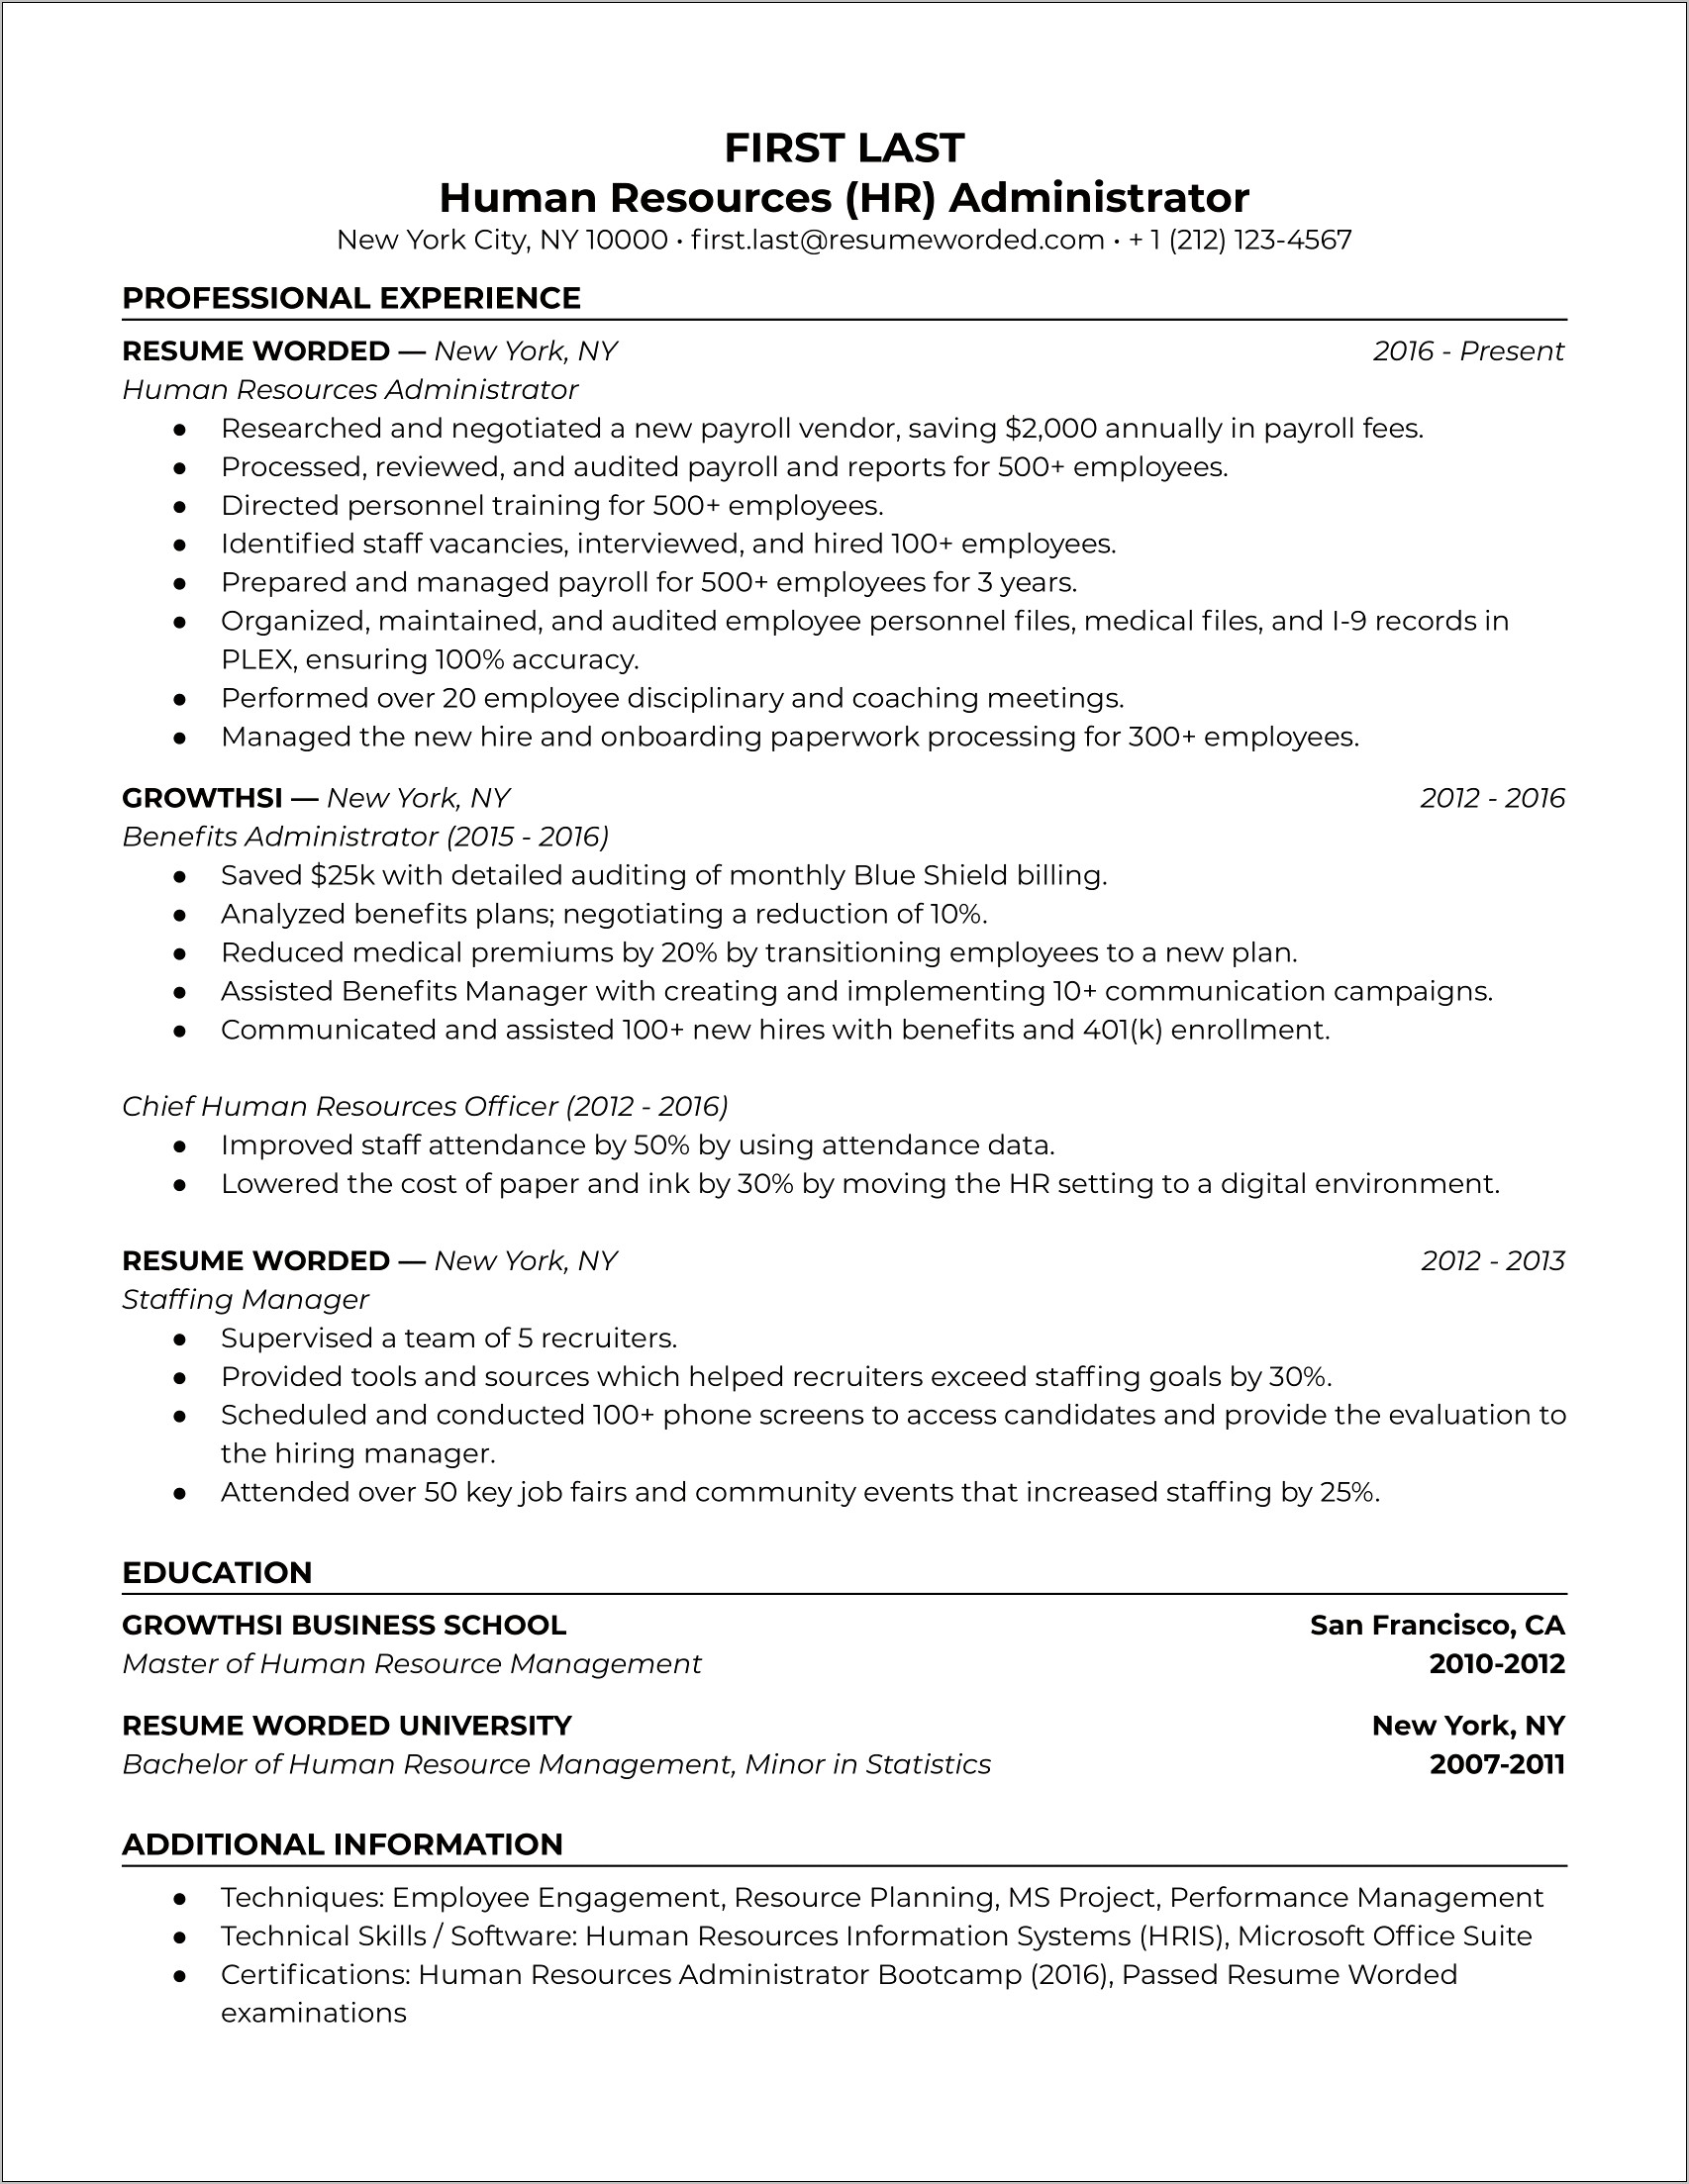 Chief Human Resources Officer Resume Samples